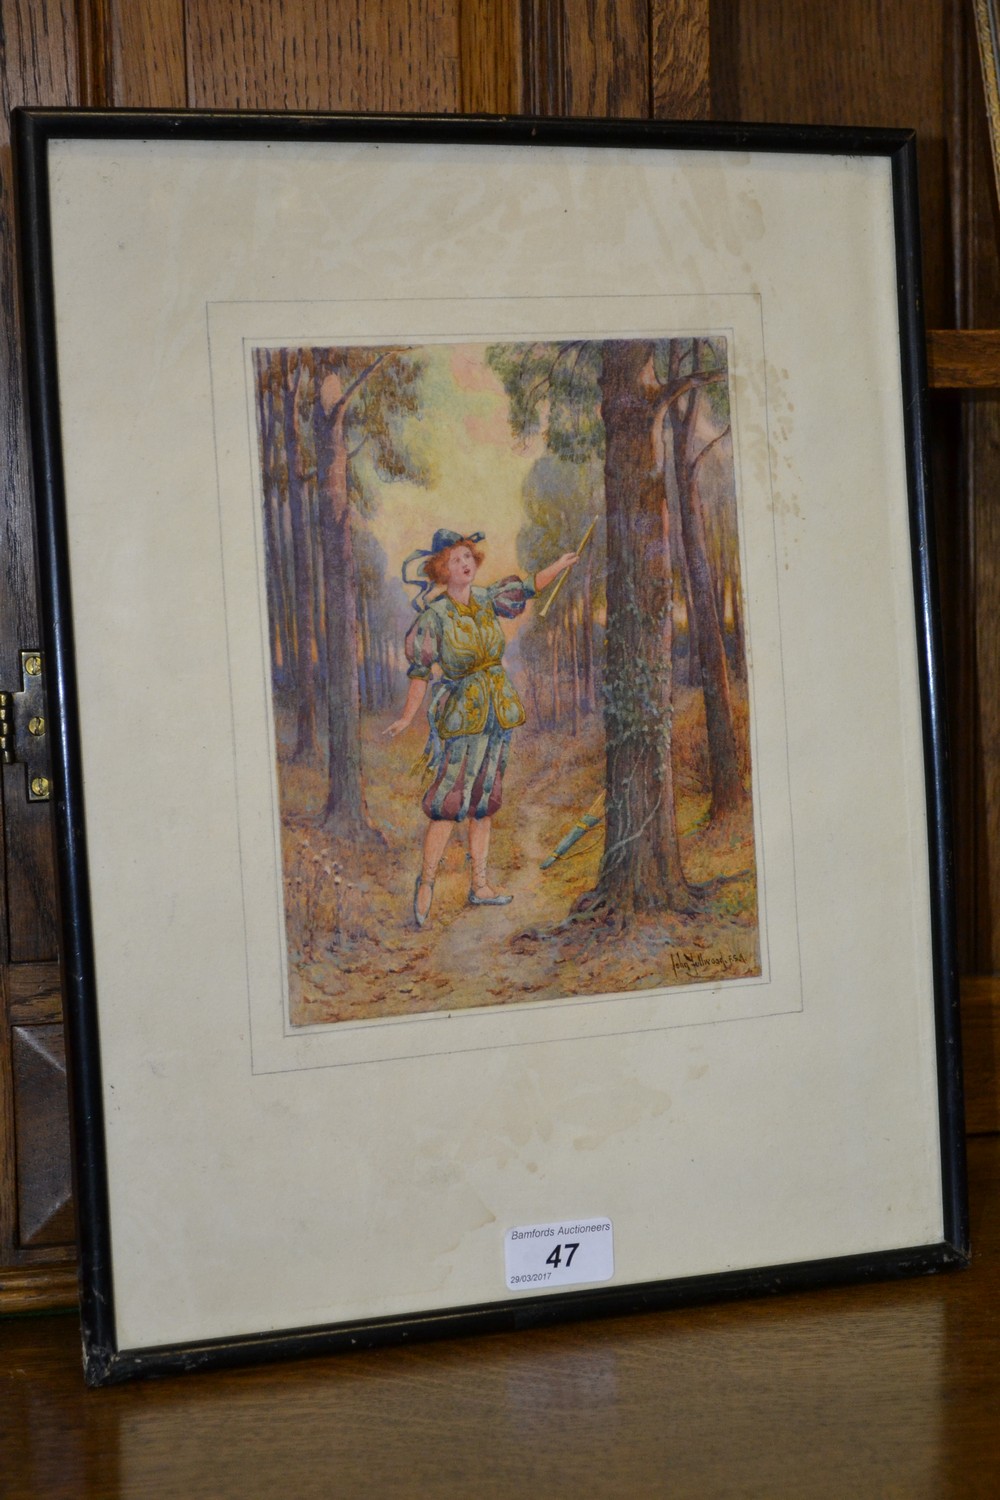 John Fullwood (1883 - 1931) In the Woods signed, watercolour, 21.5cm x 16.